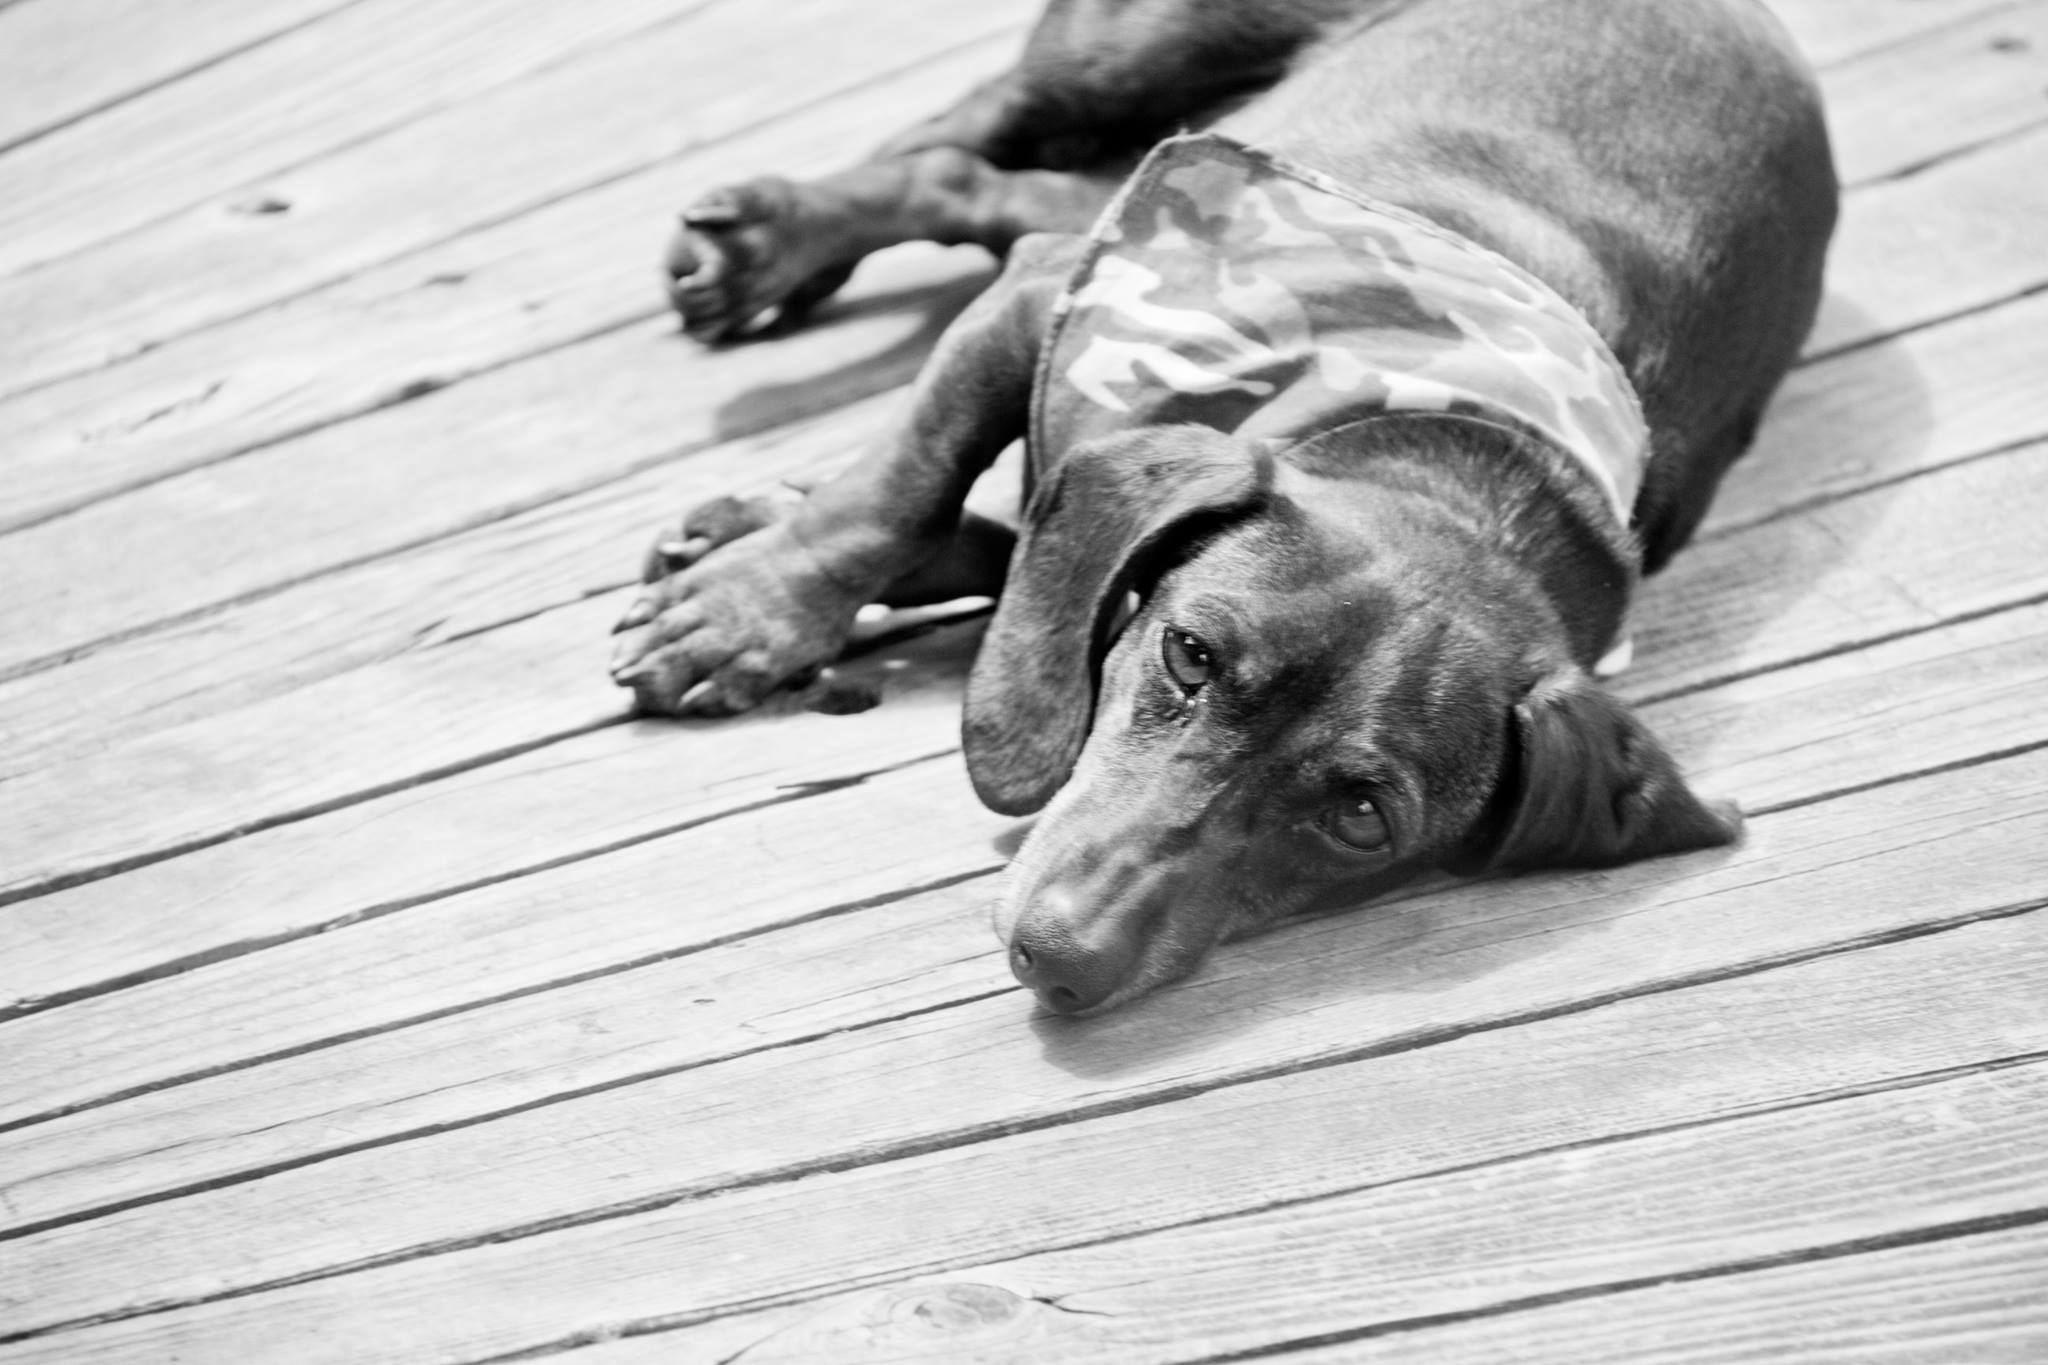 A sweet little dauchshund lays resting on the wooden decking